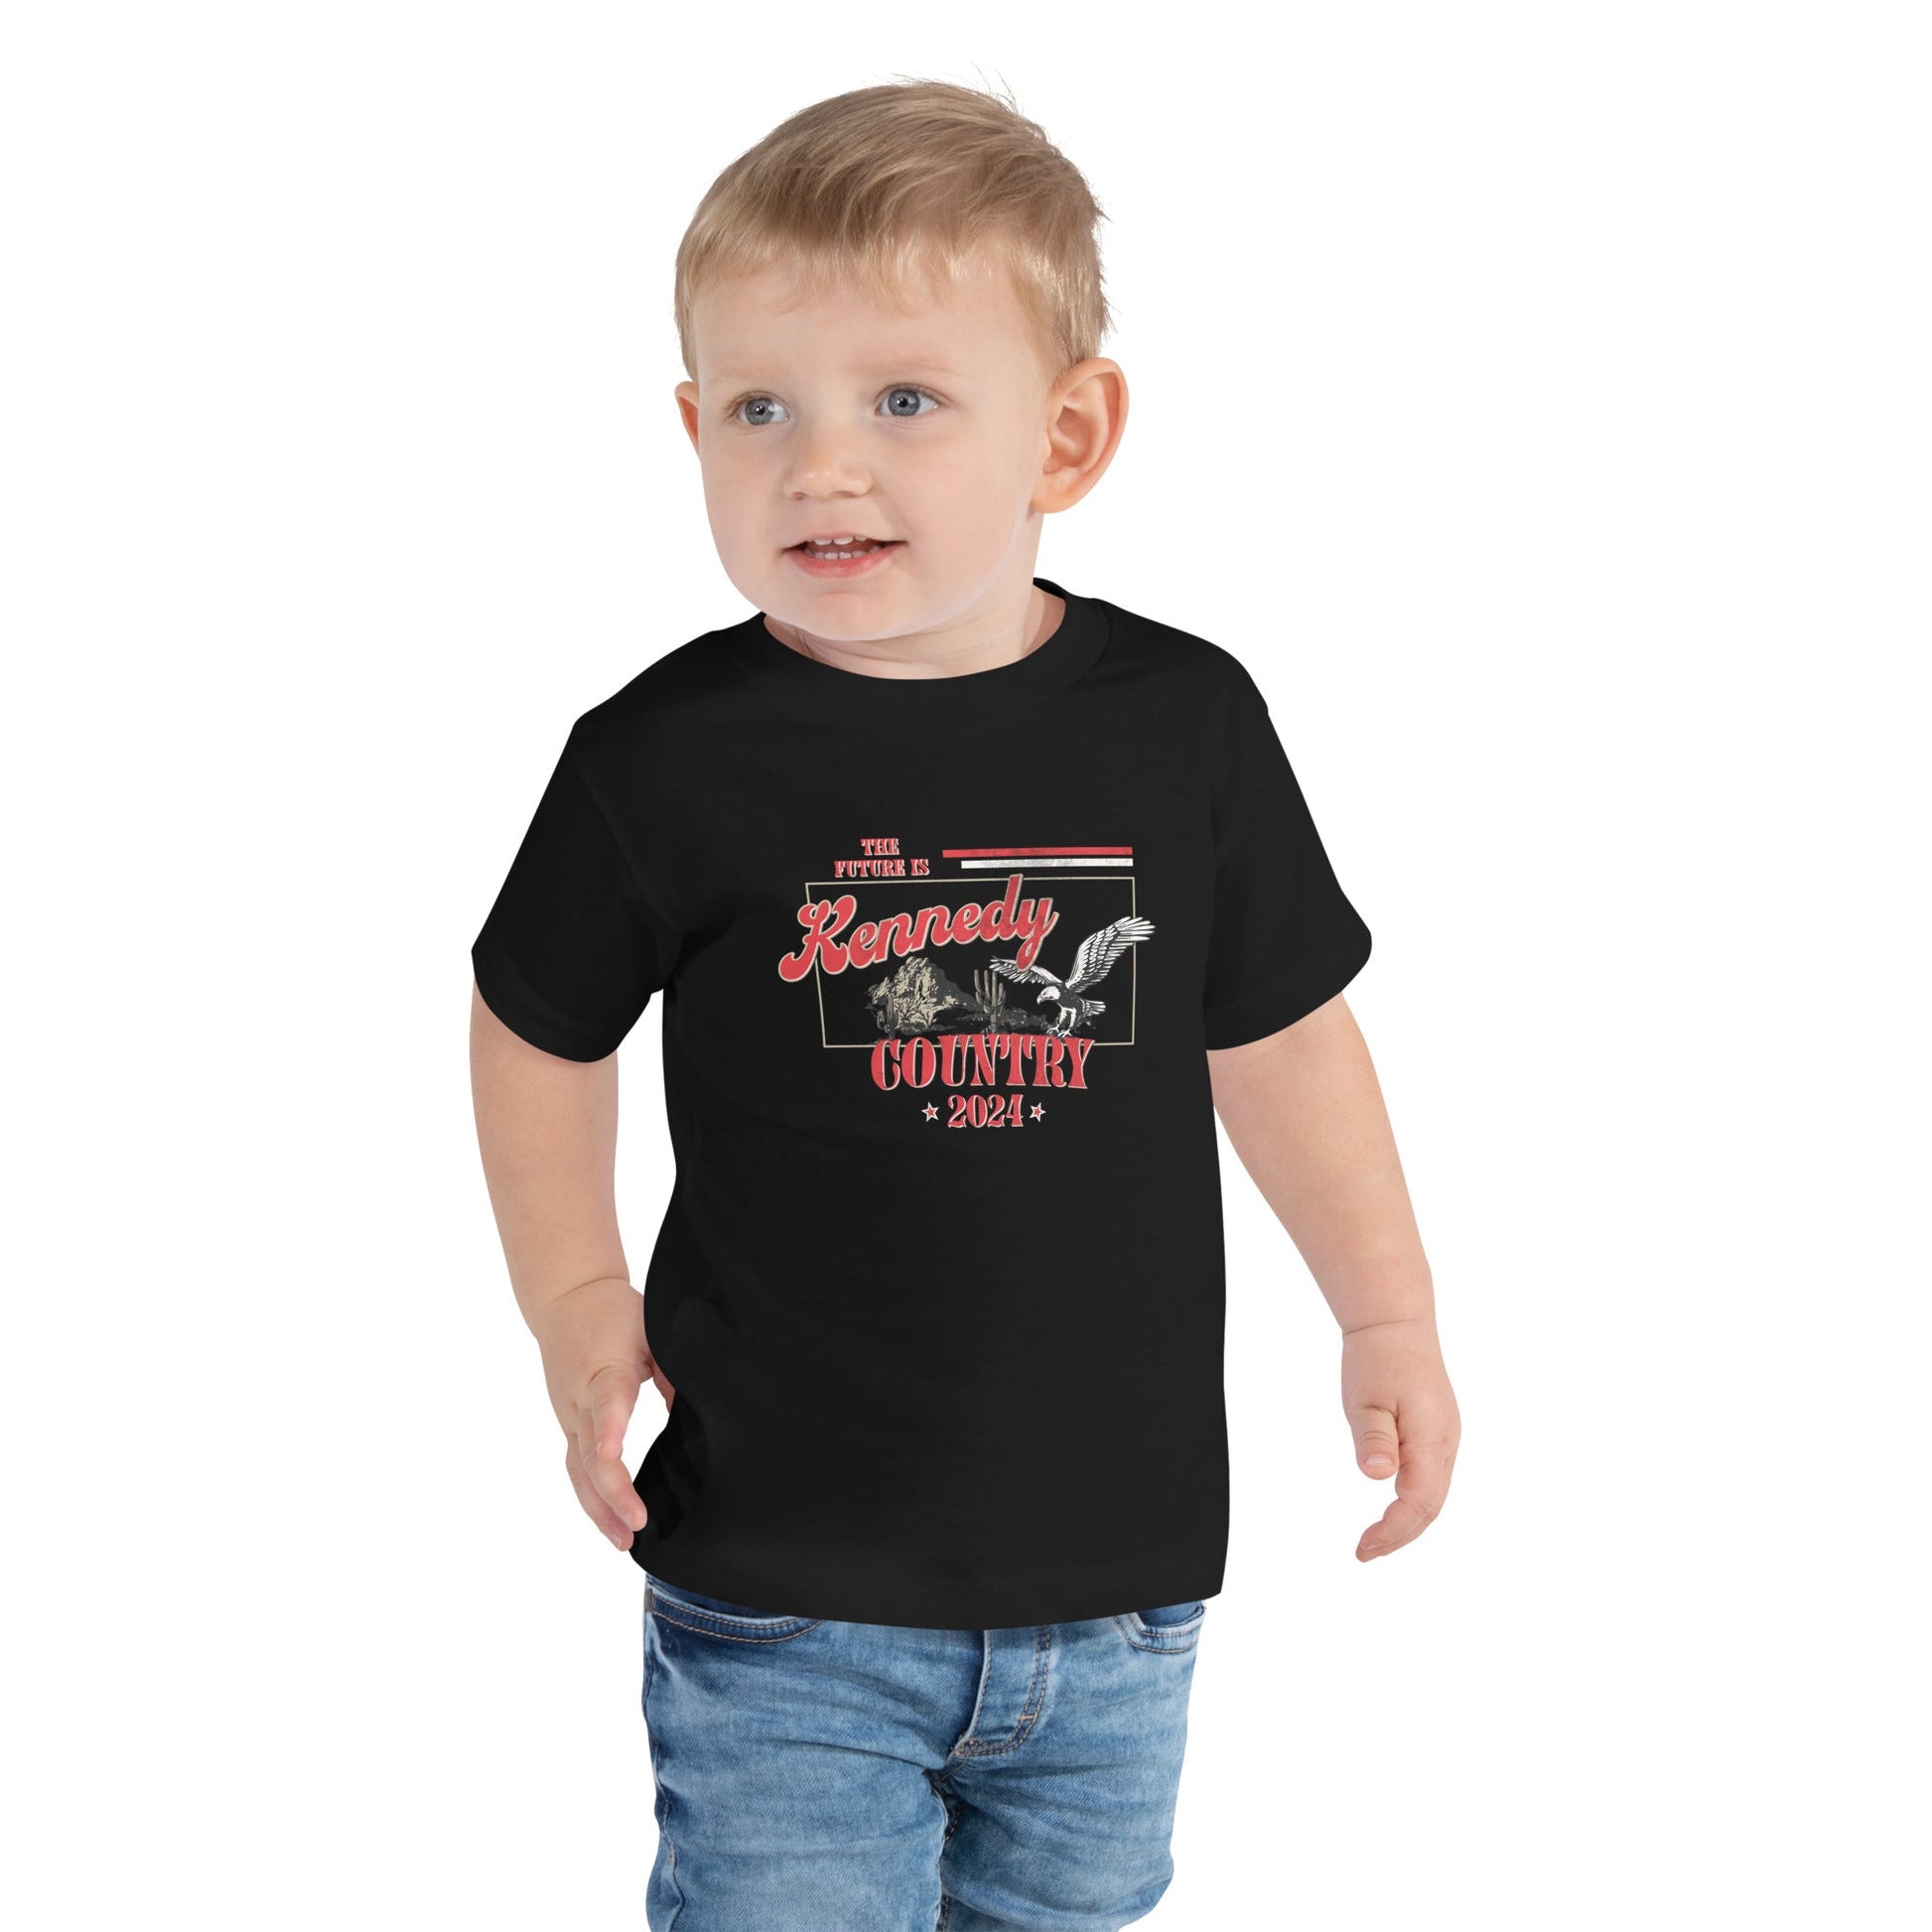 Kennedy Country Toddler Tee - TEAM KENNEDY. All rights reserved